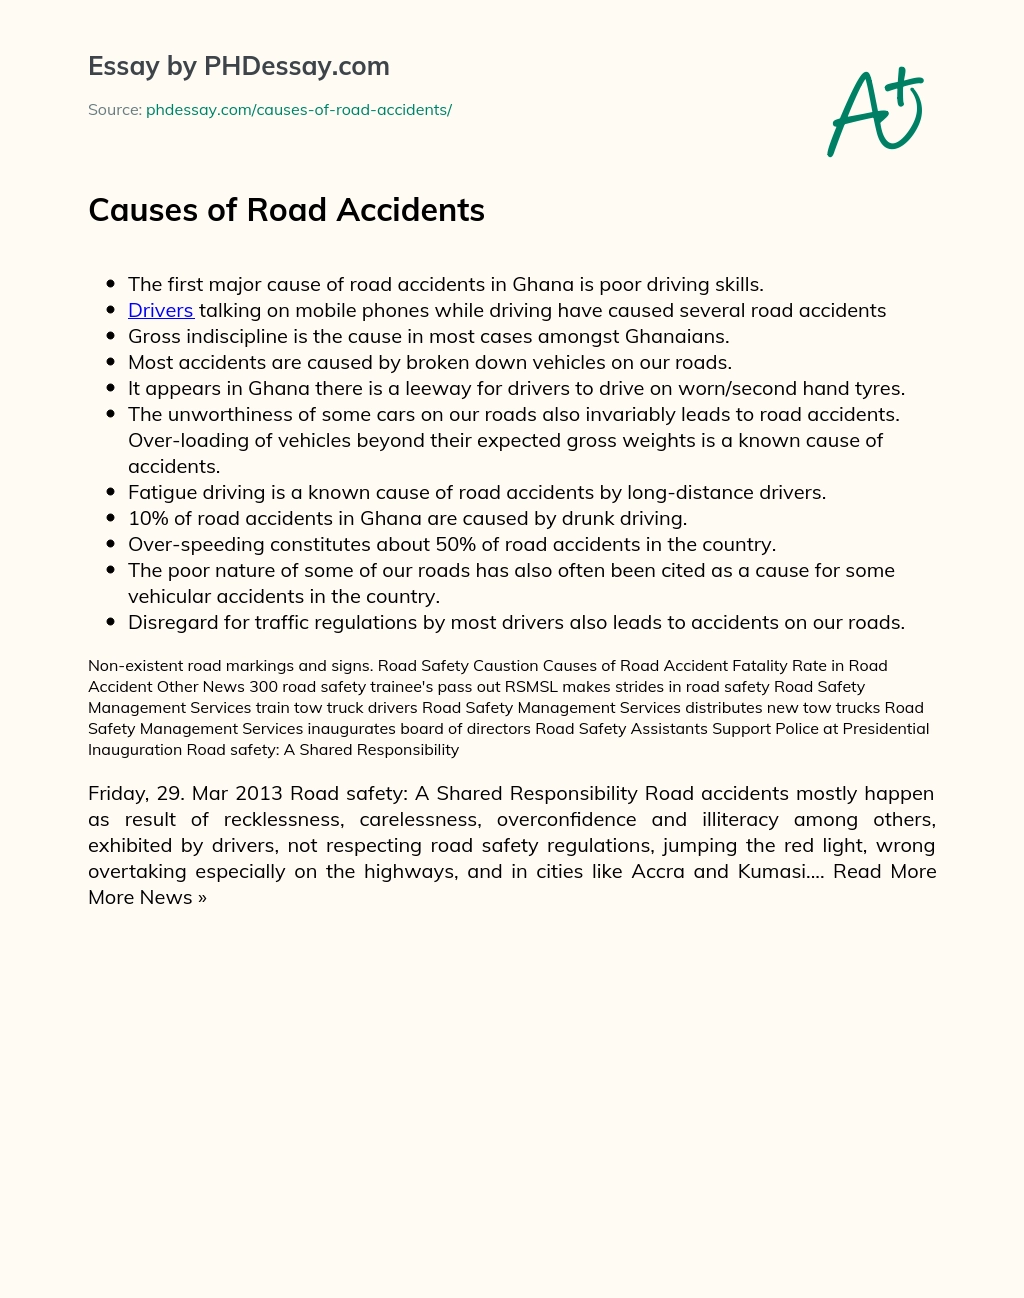 Causes of Road Accidents essay